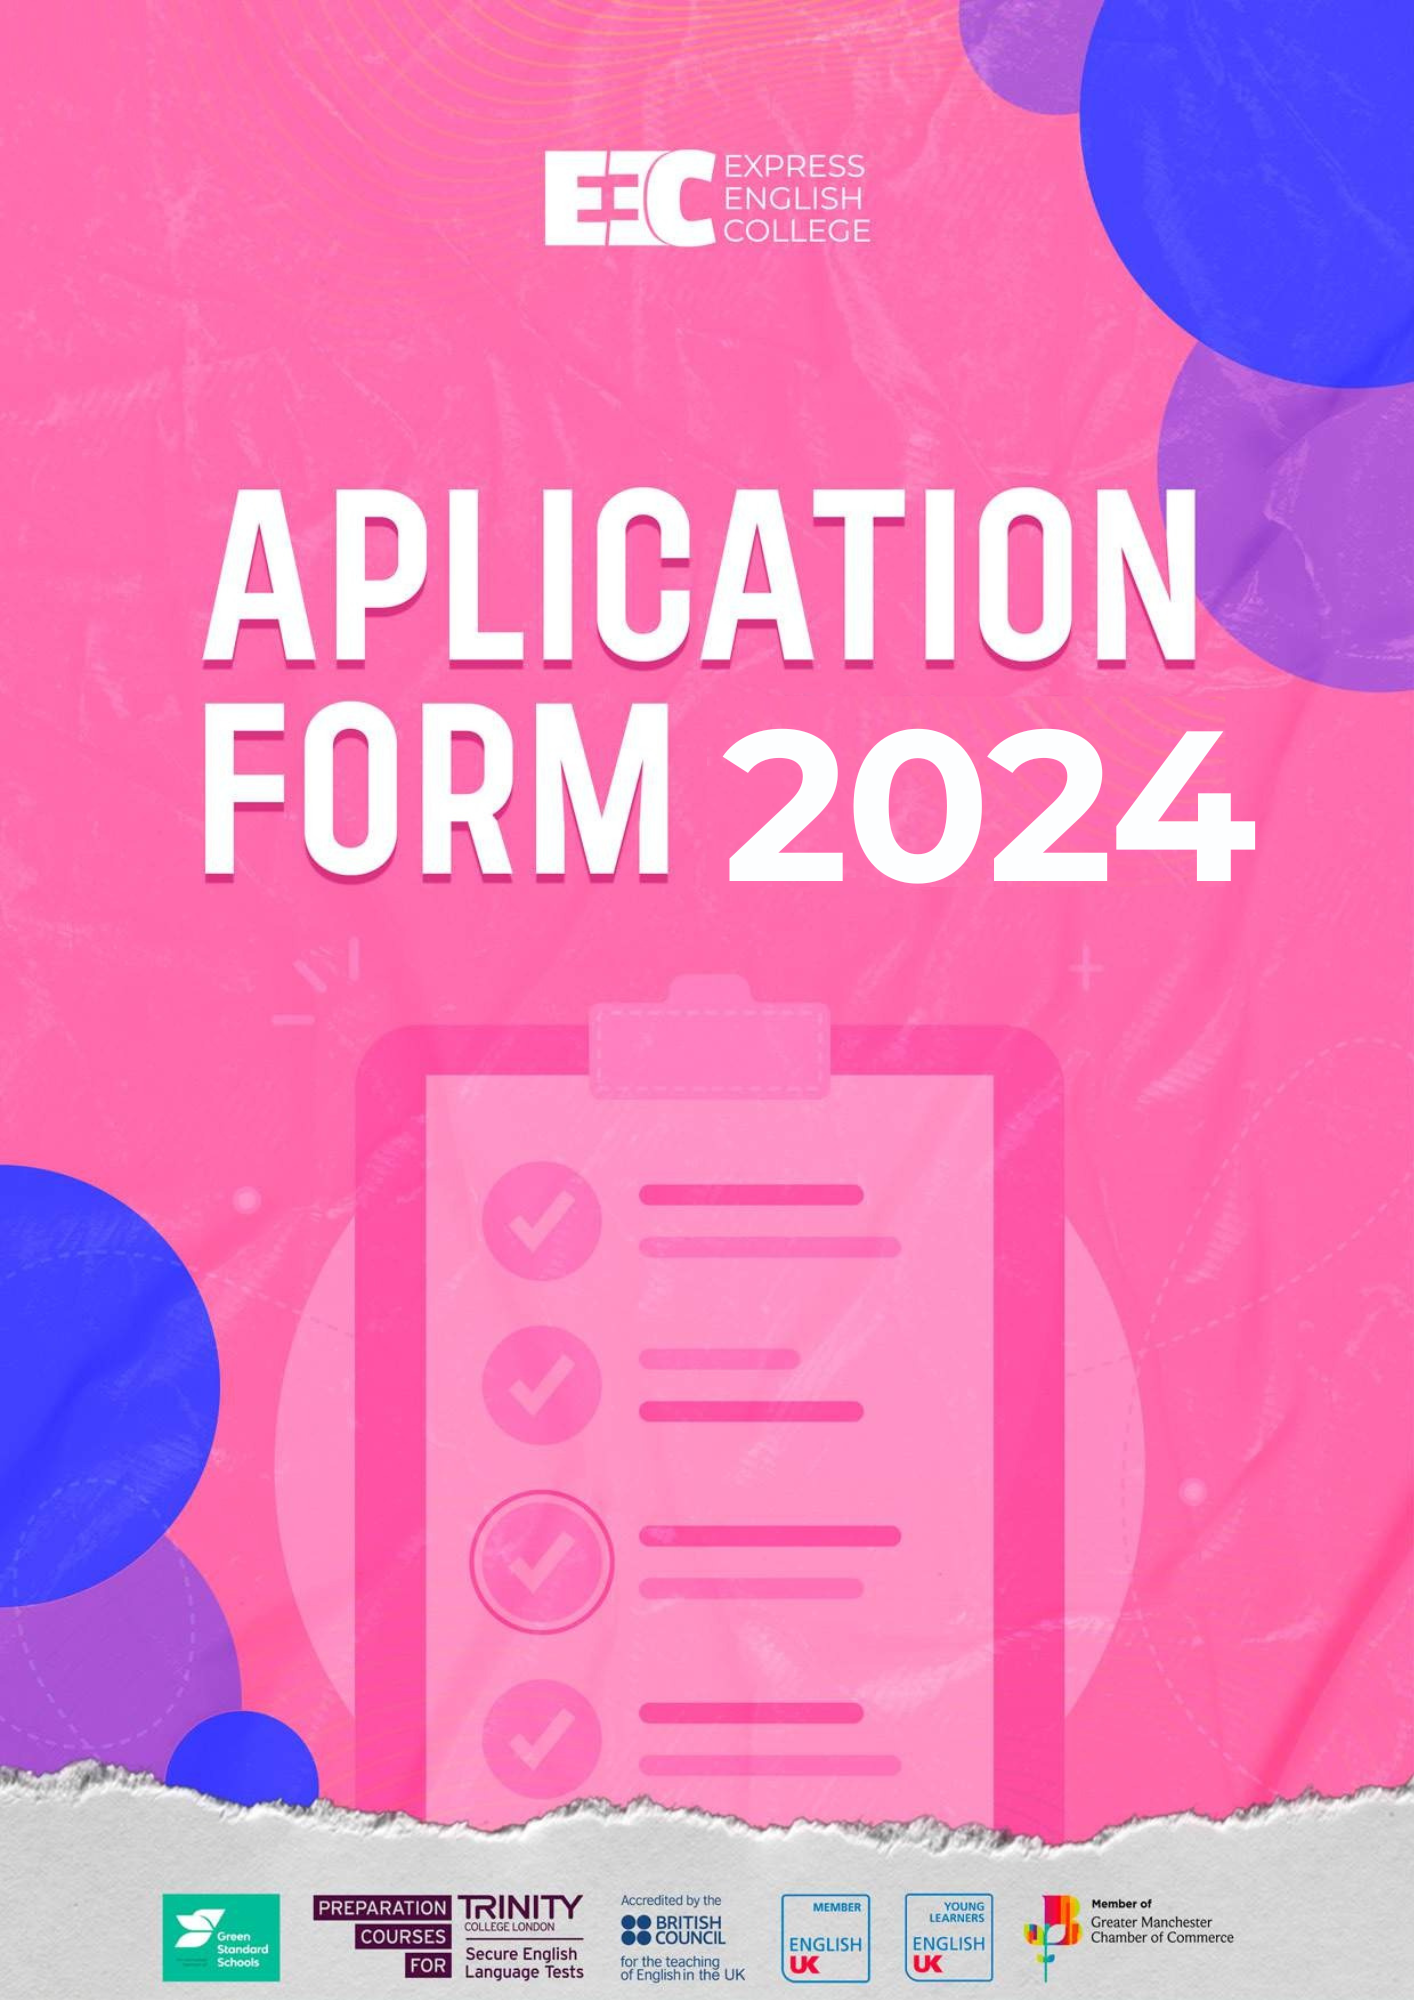 Student Application Form 2024